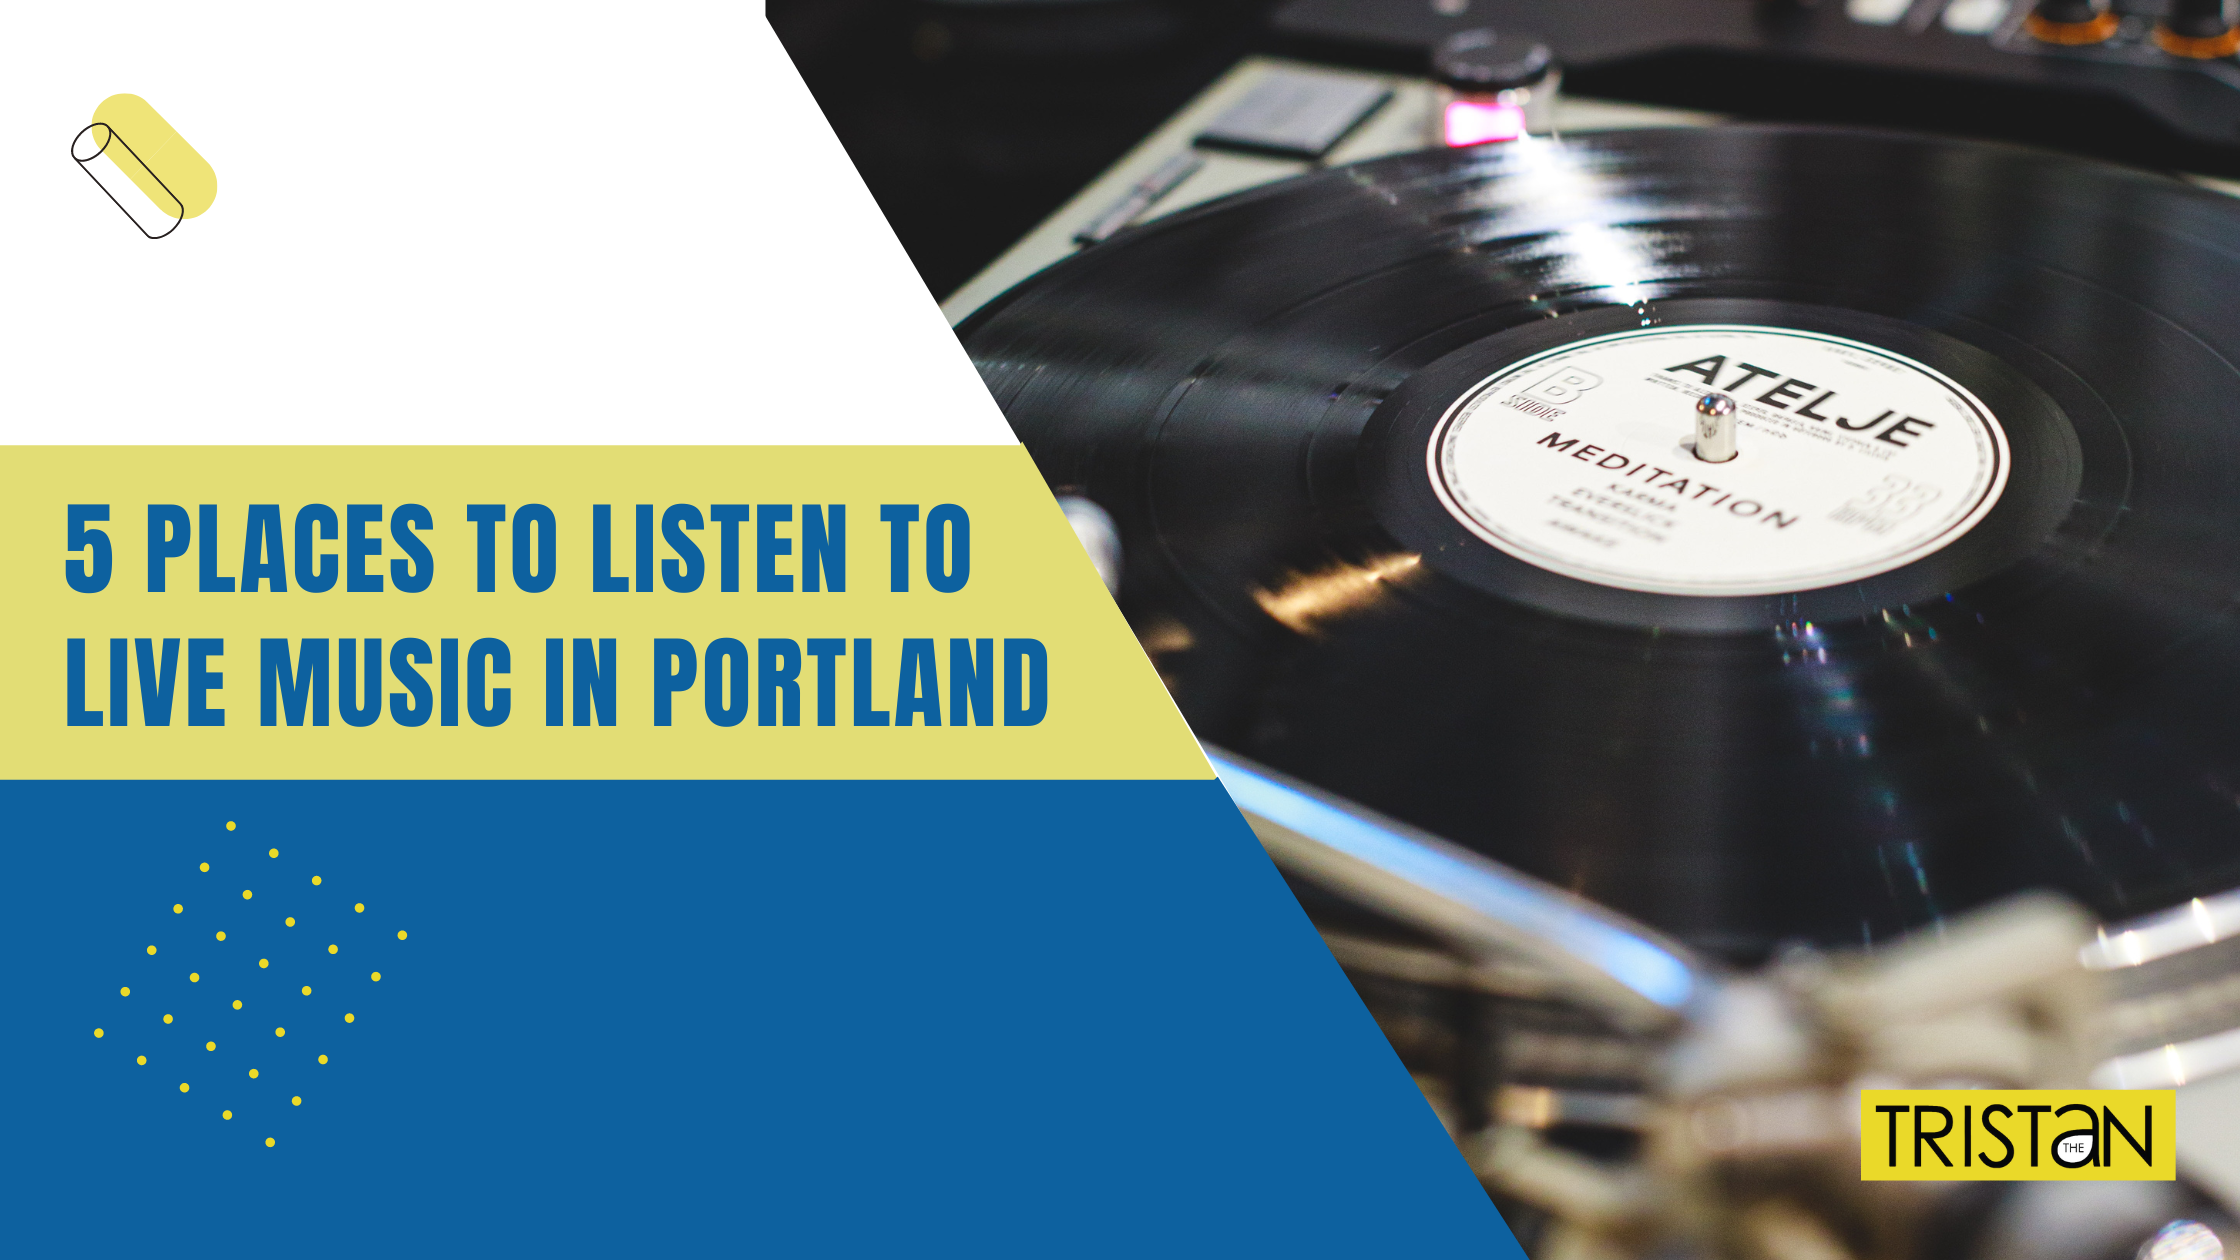 5 Places to Listen to Live Music in Portland